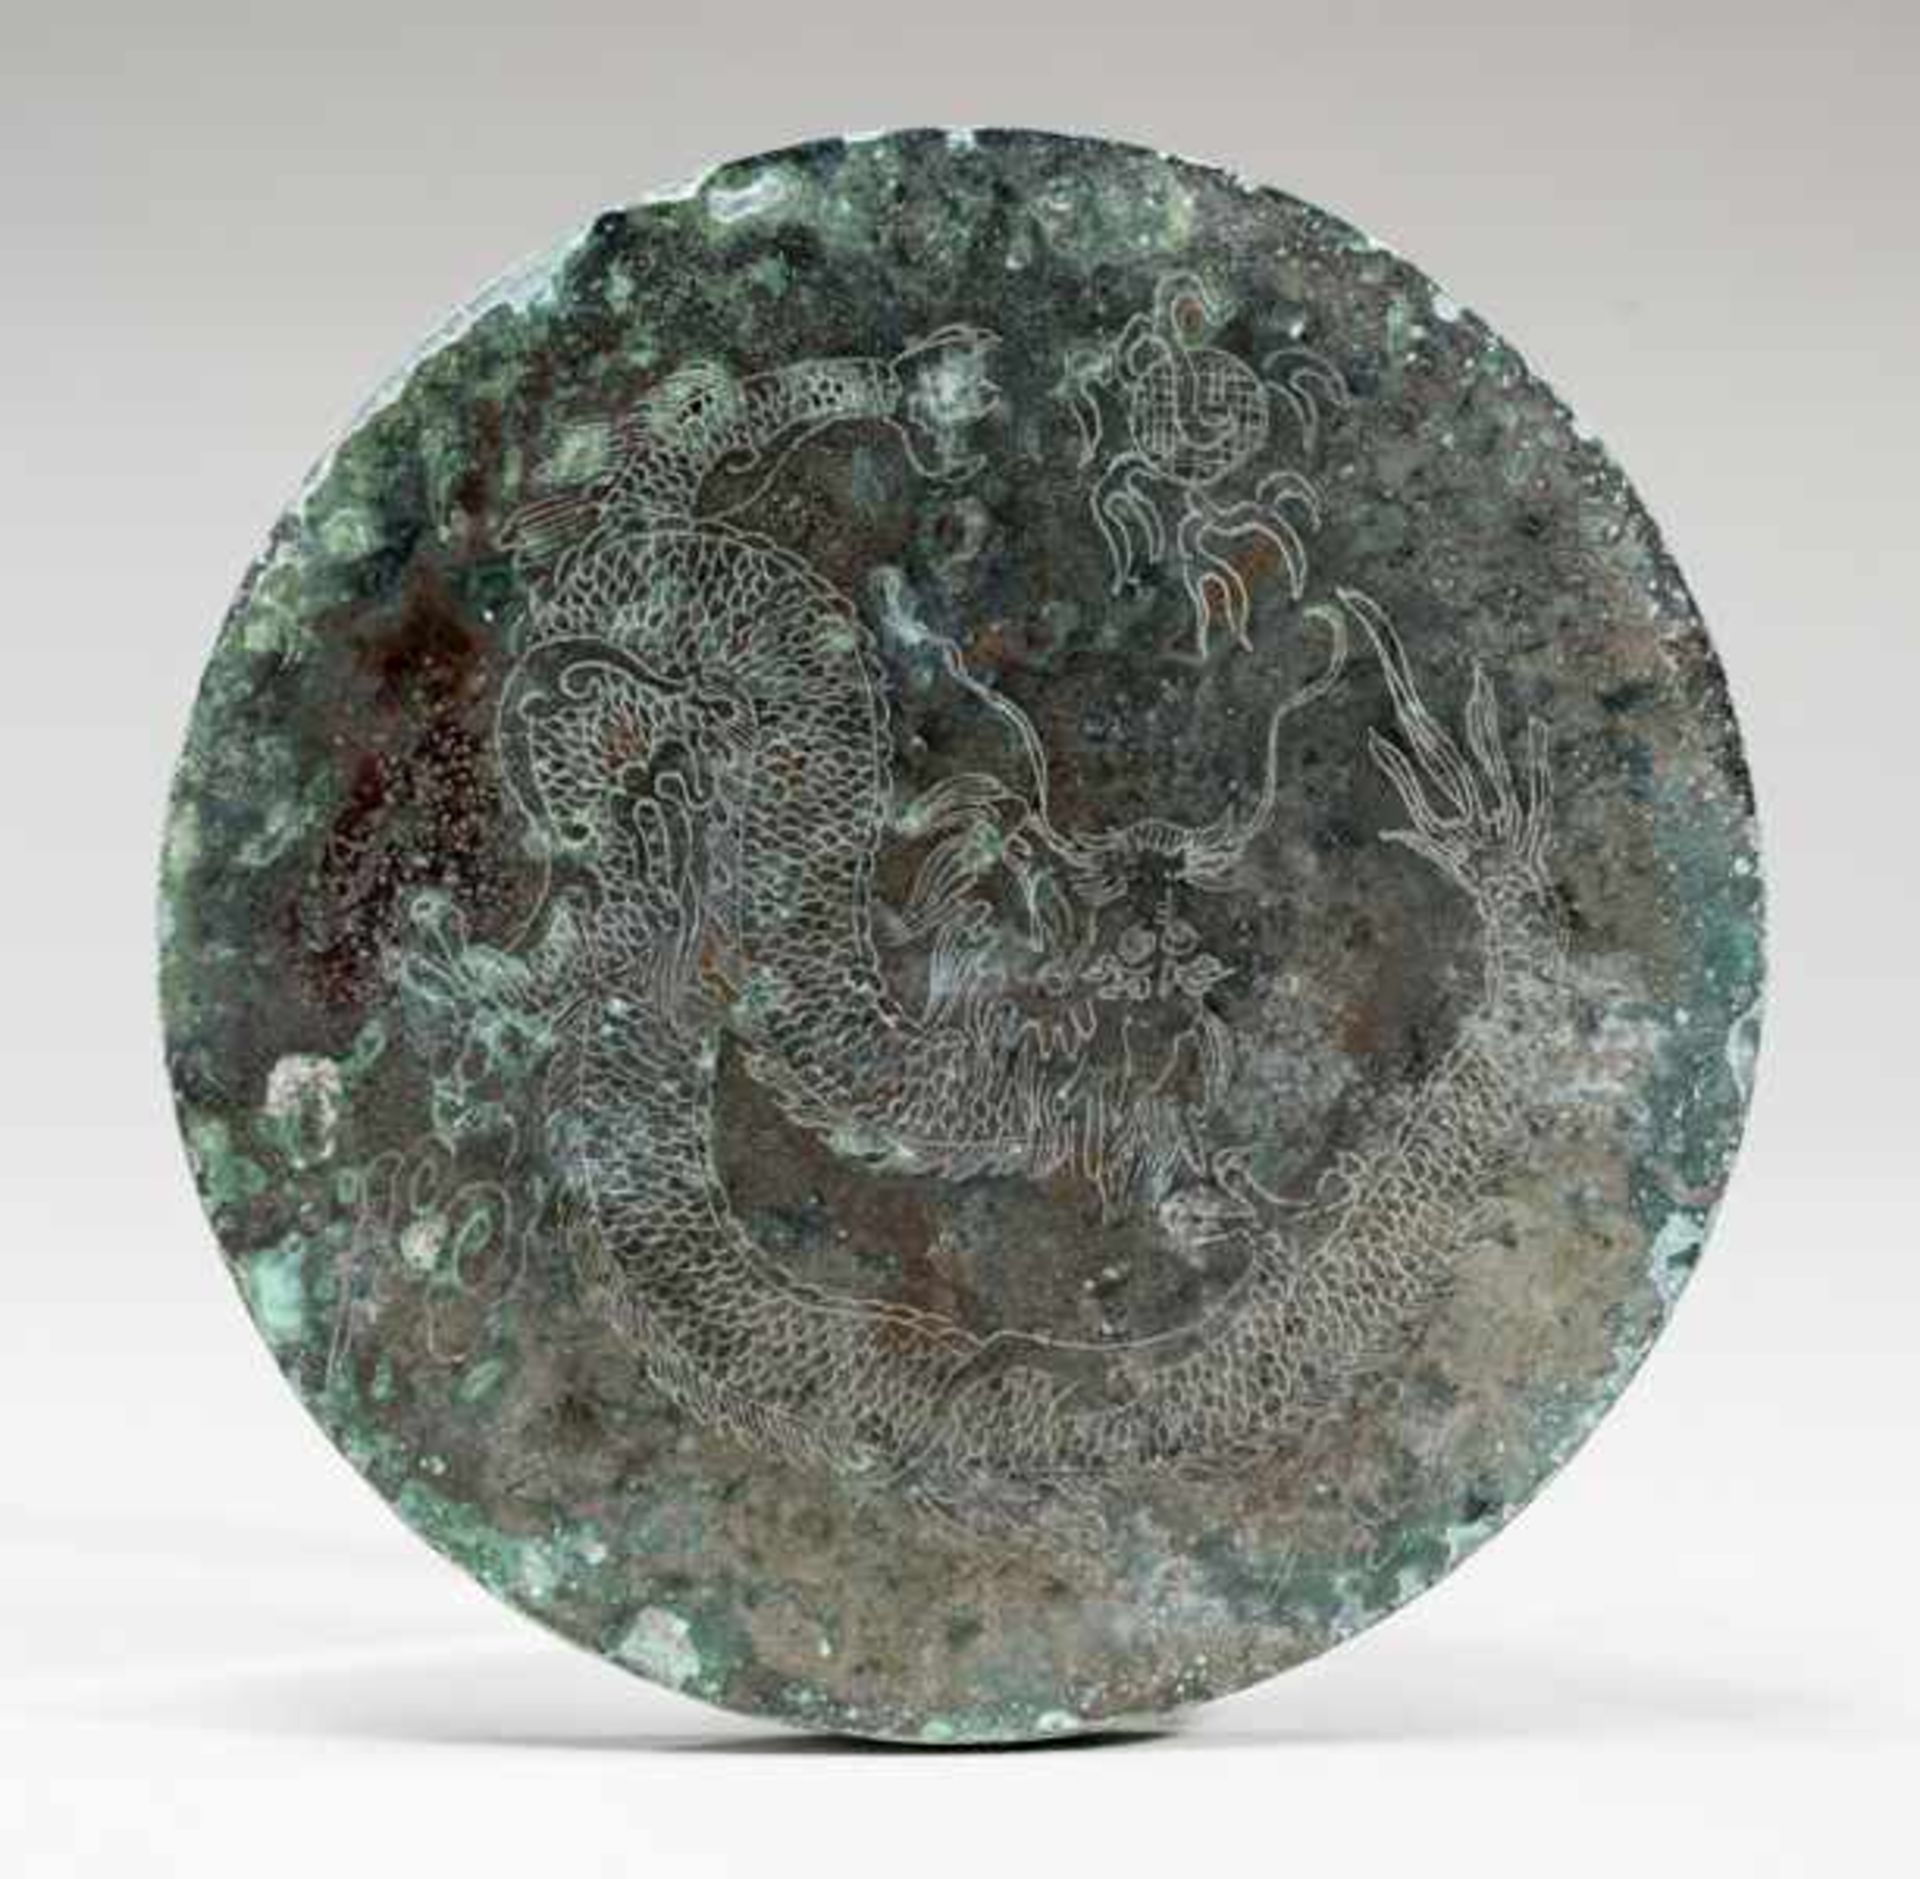 MIRROR RICHLY ORNAMENTED WITH ANIMALS Bronze. China, Tang dynasty (618 - 907)瑞獸銅鏡Decorated in a very - Image 2 of 3